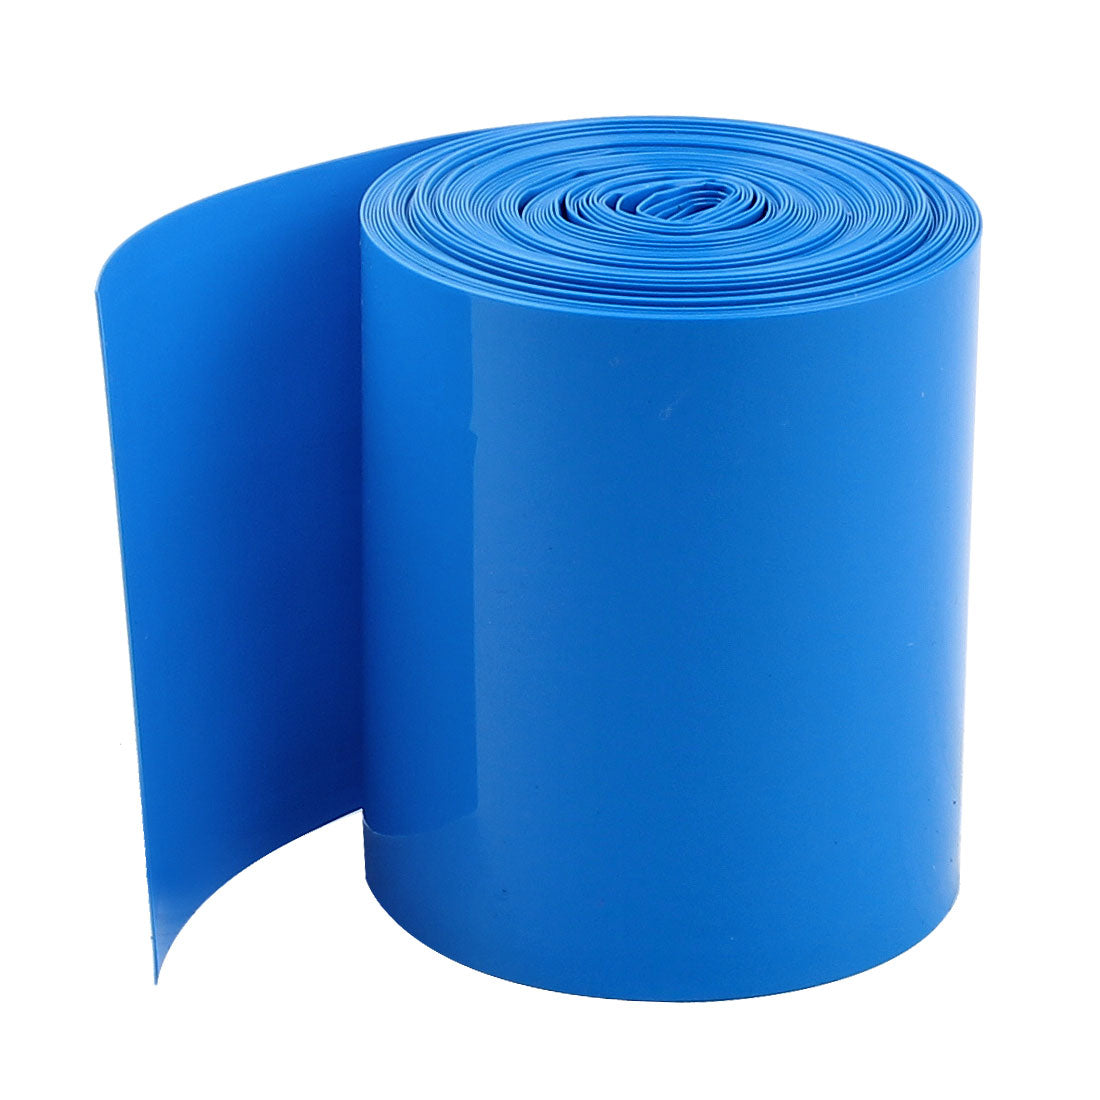 uxcell Uxcell 5Meters 50mm Width PVC Heat Shrink Wrap Tube Blue for 2 x 18650 Battery